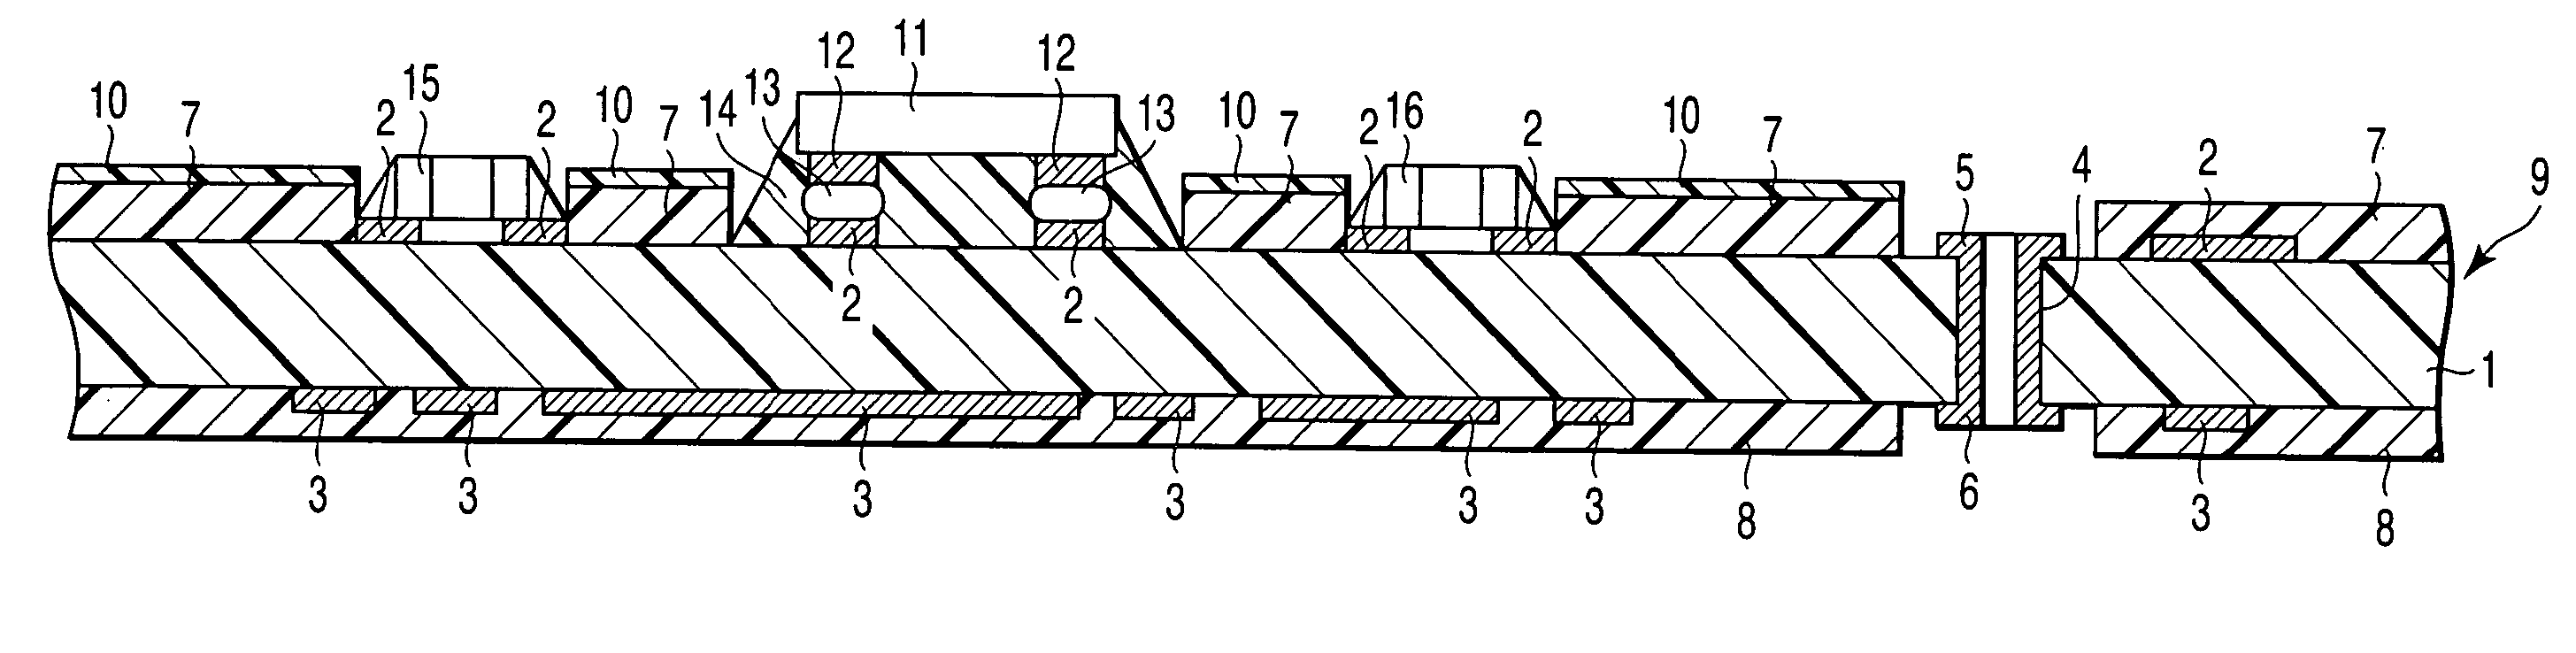 Module substrate and disk apparatus